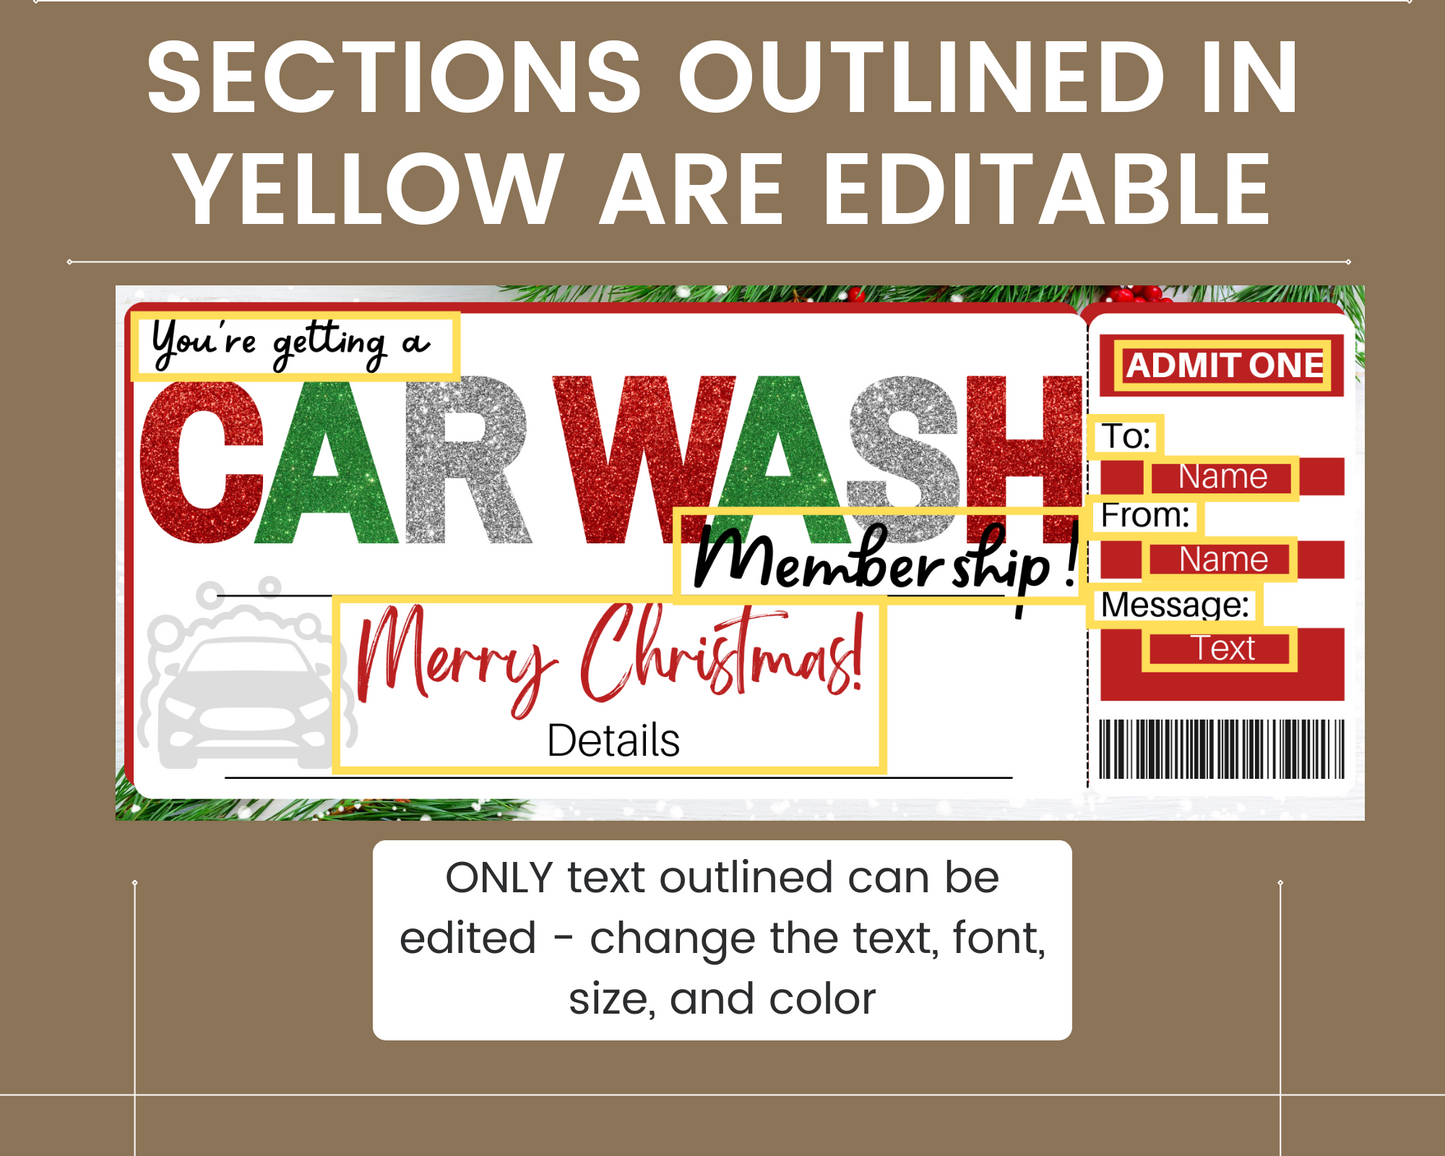 Christmas Car Wash Gift Ticket Template